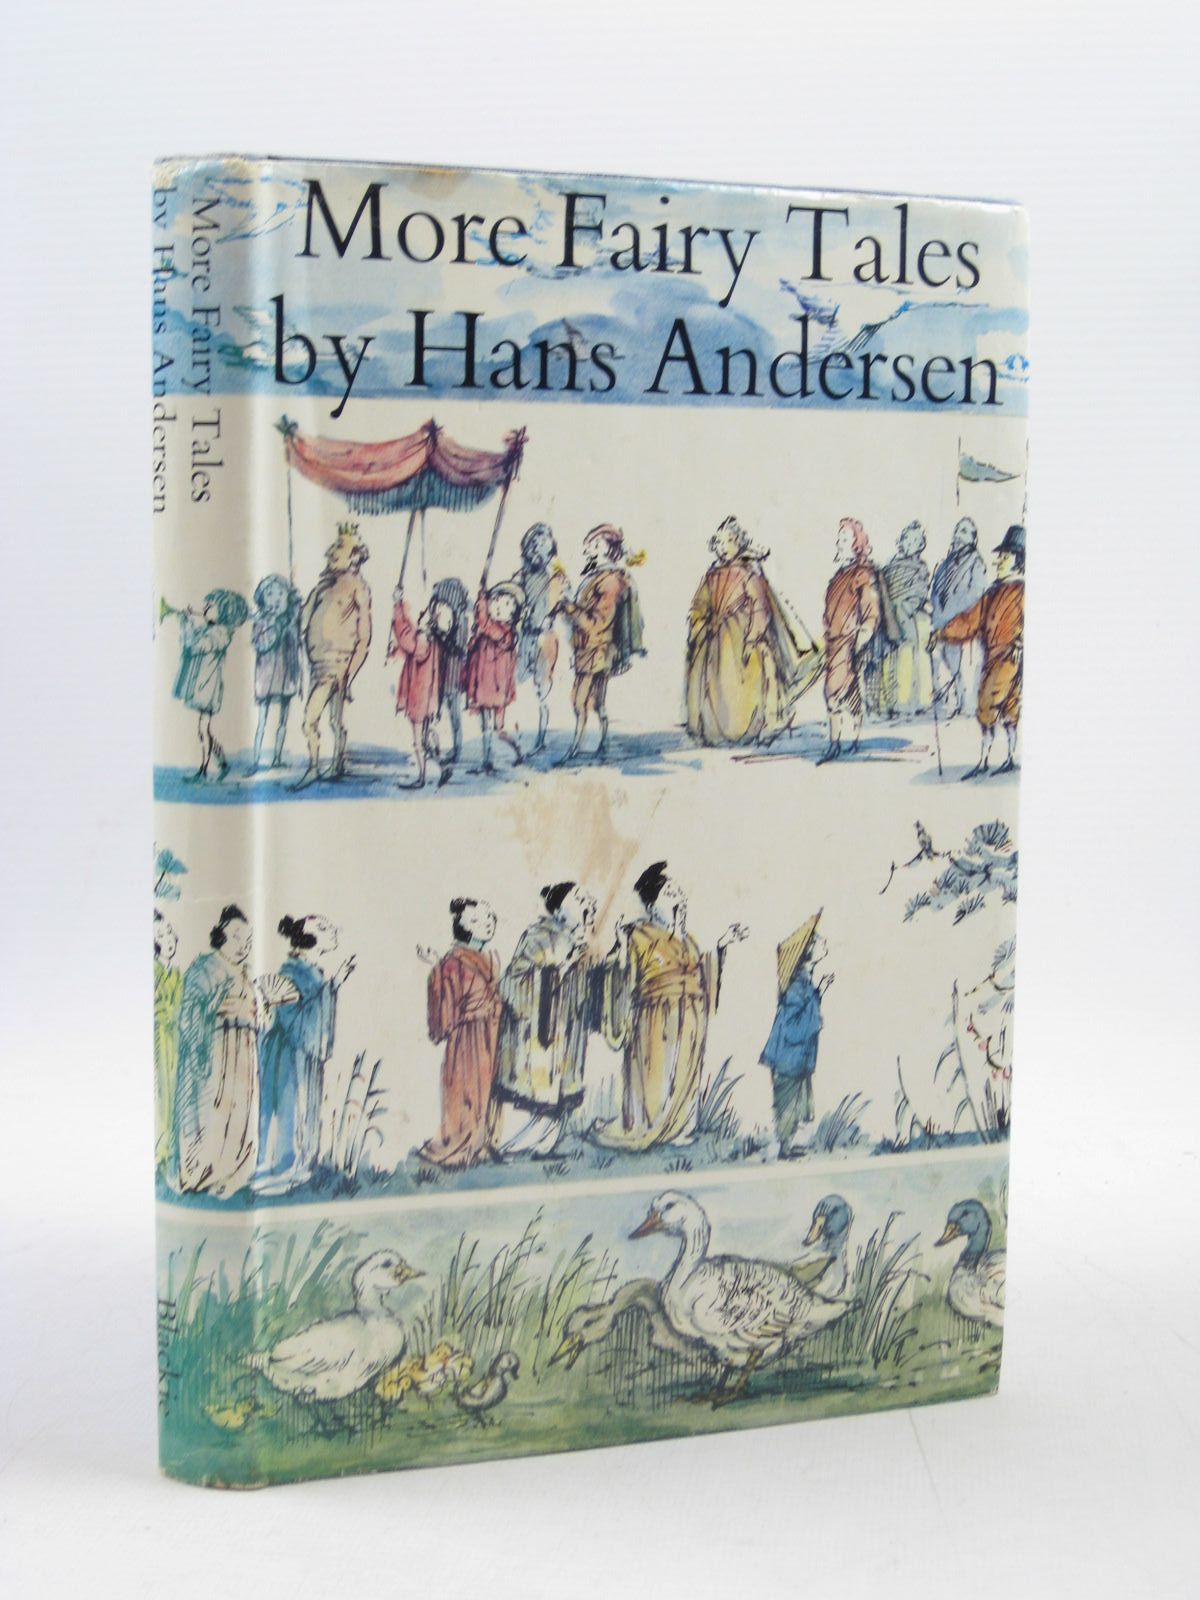 Cover of MORE FAIRY TALES BY HANS ANDERSEN by Hans Christian Andersen